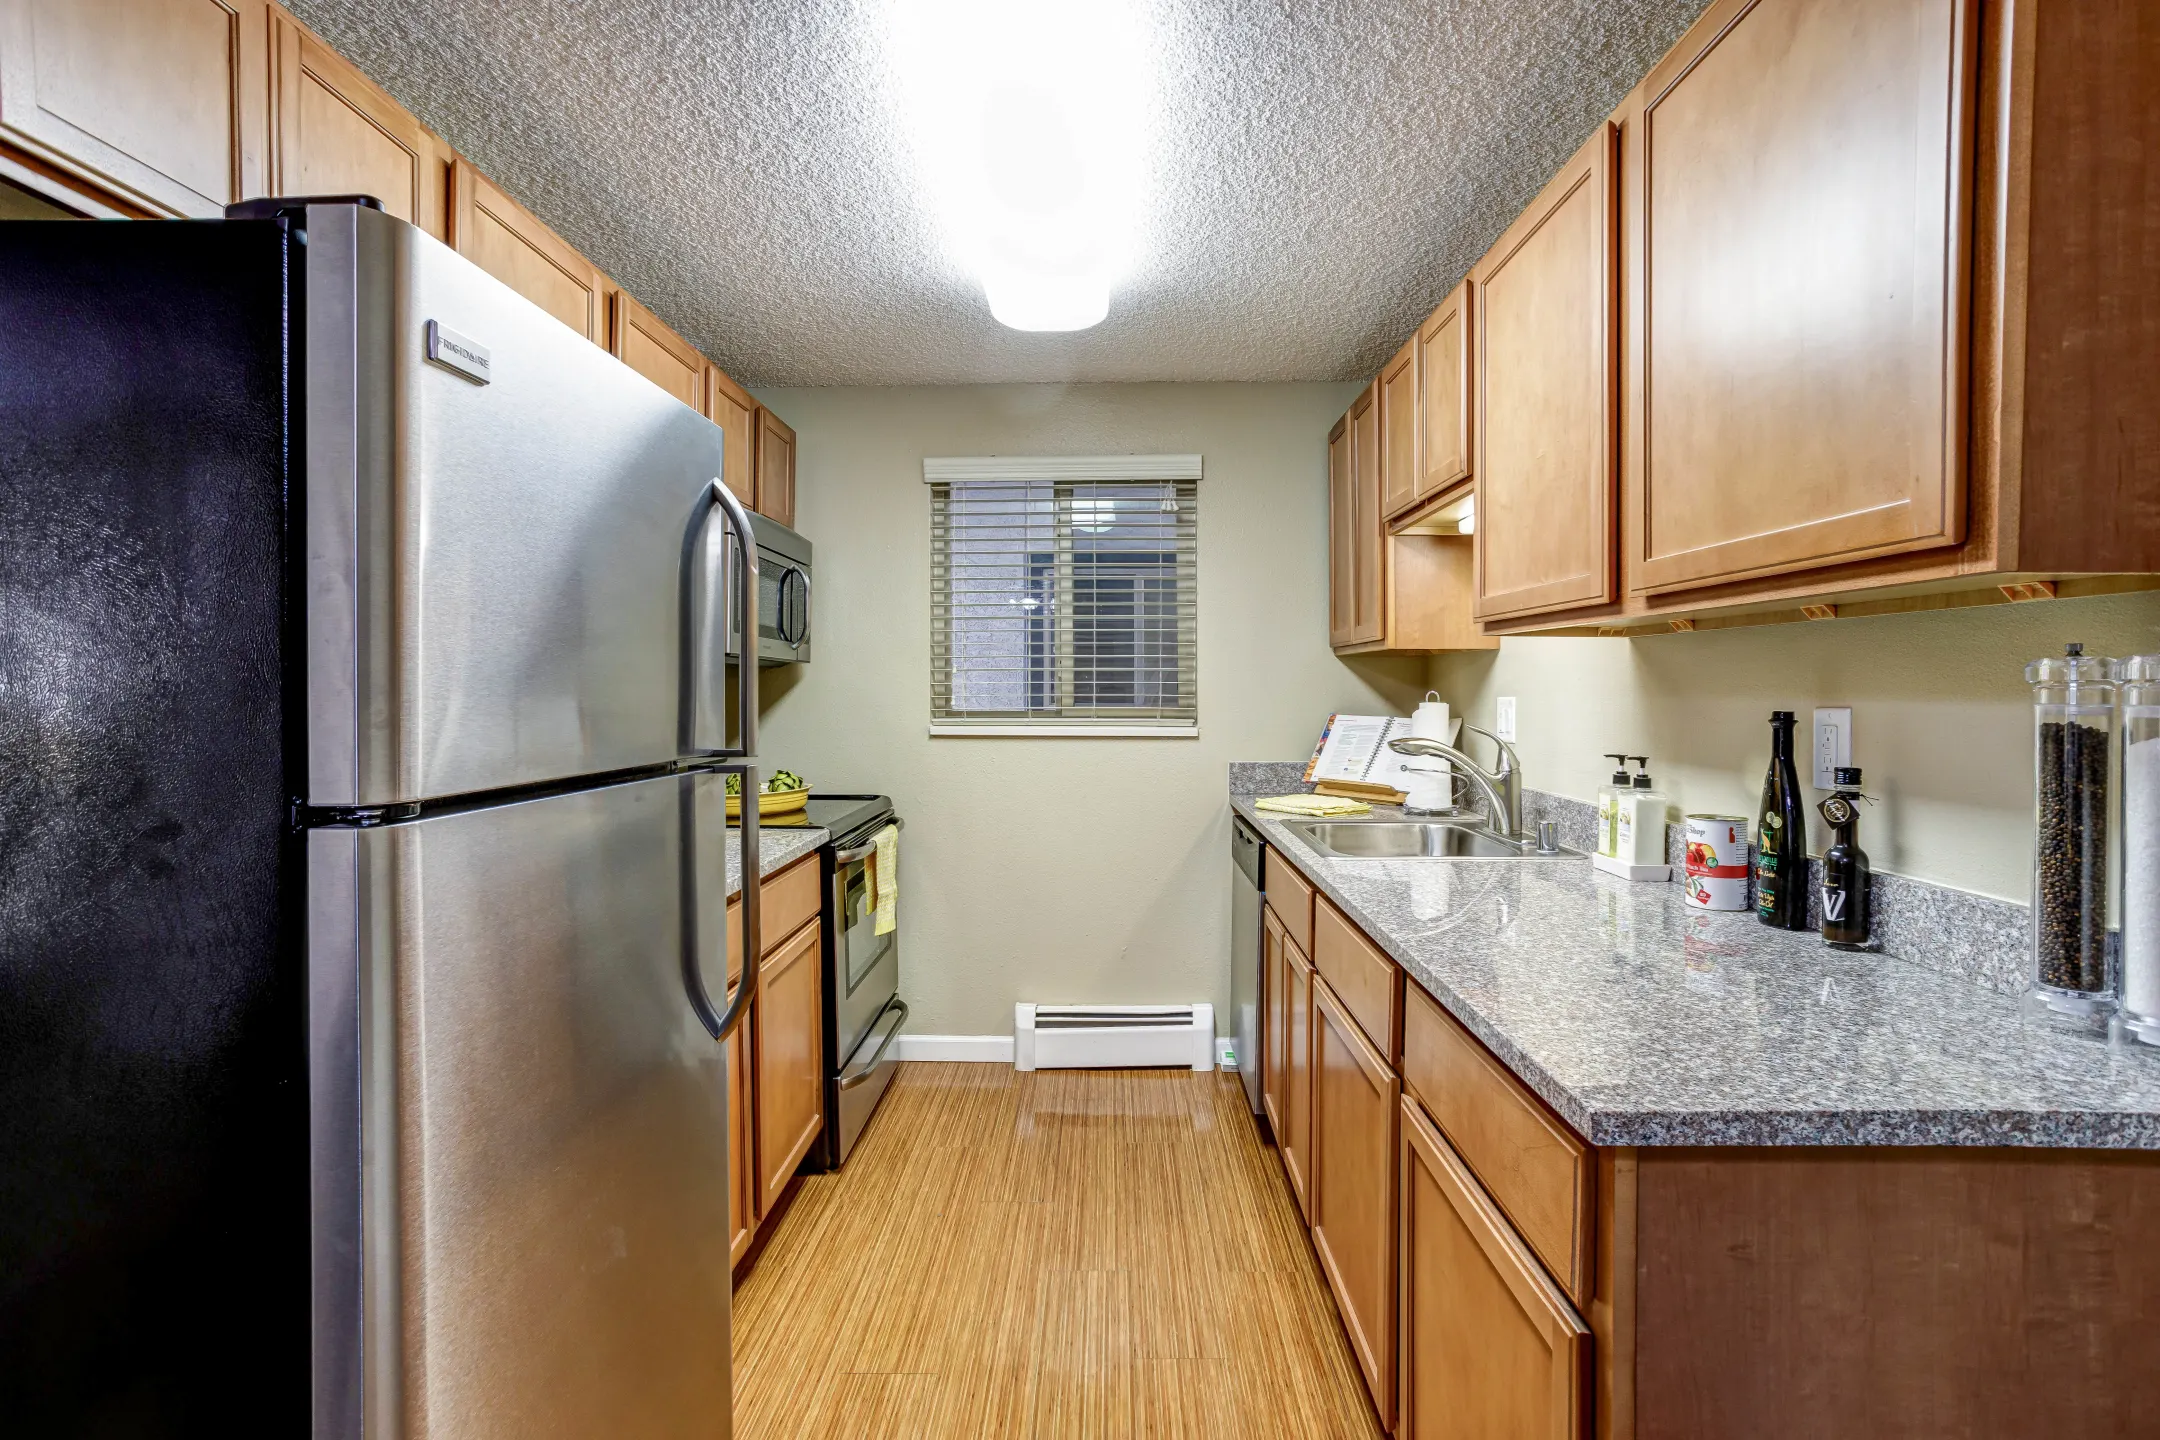 Kitchen - Sterling Heights - Greeley, CO